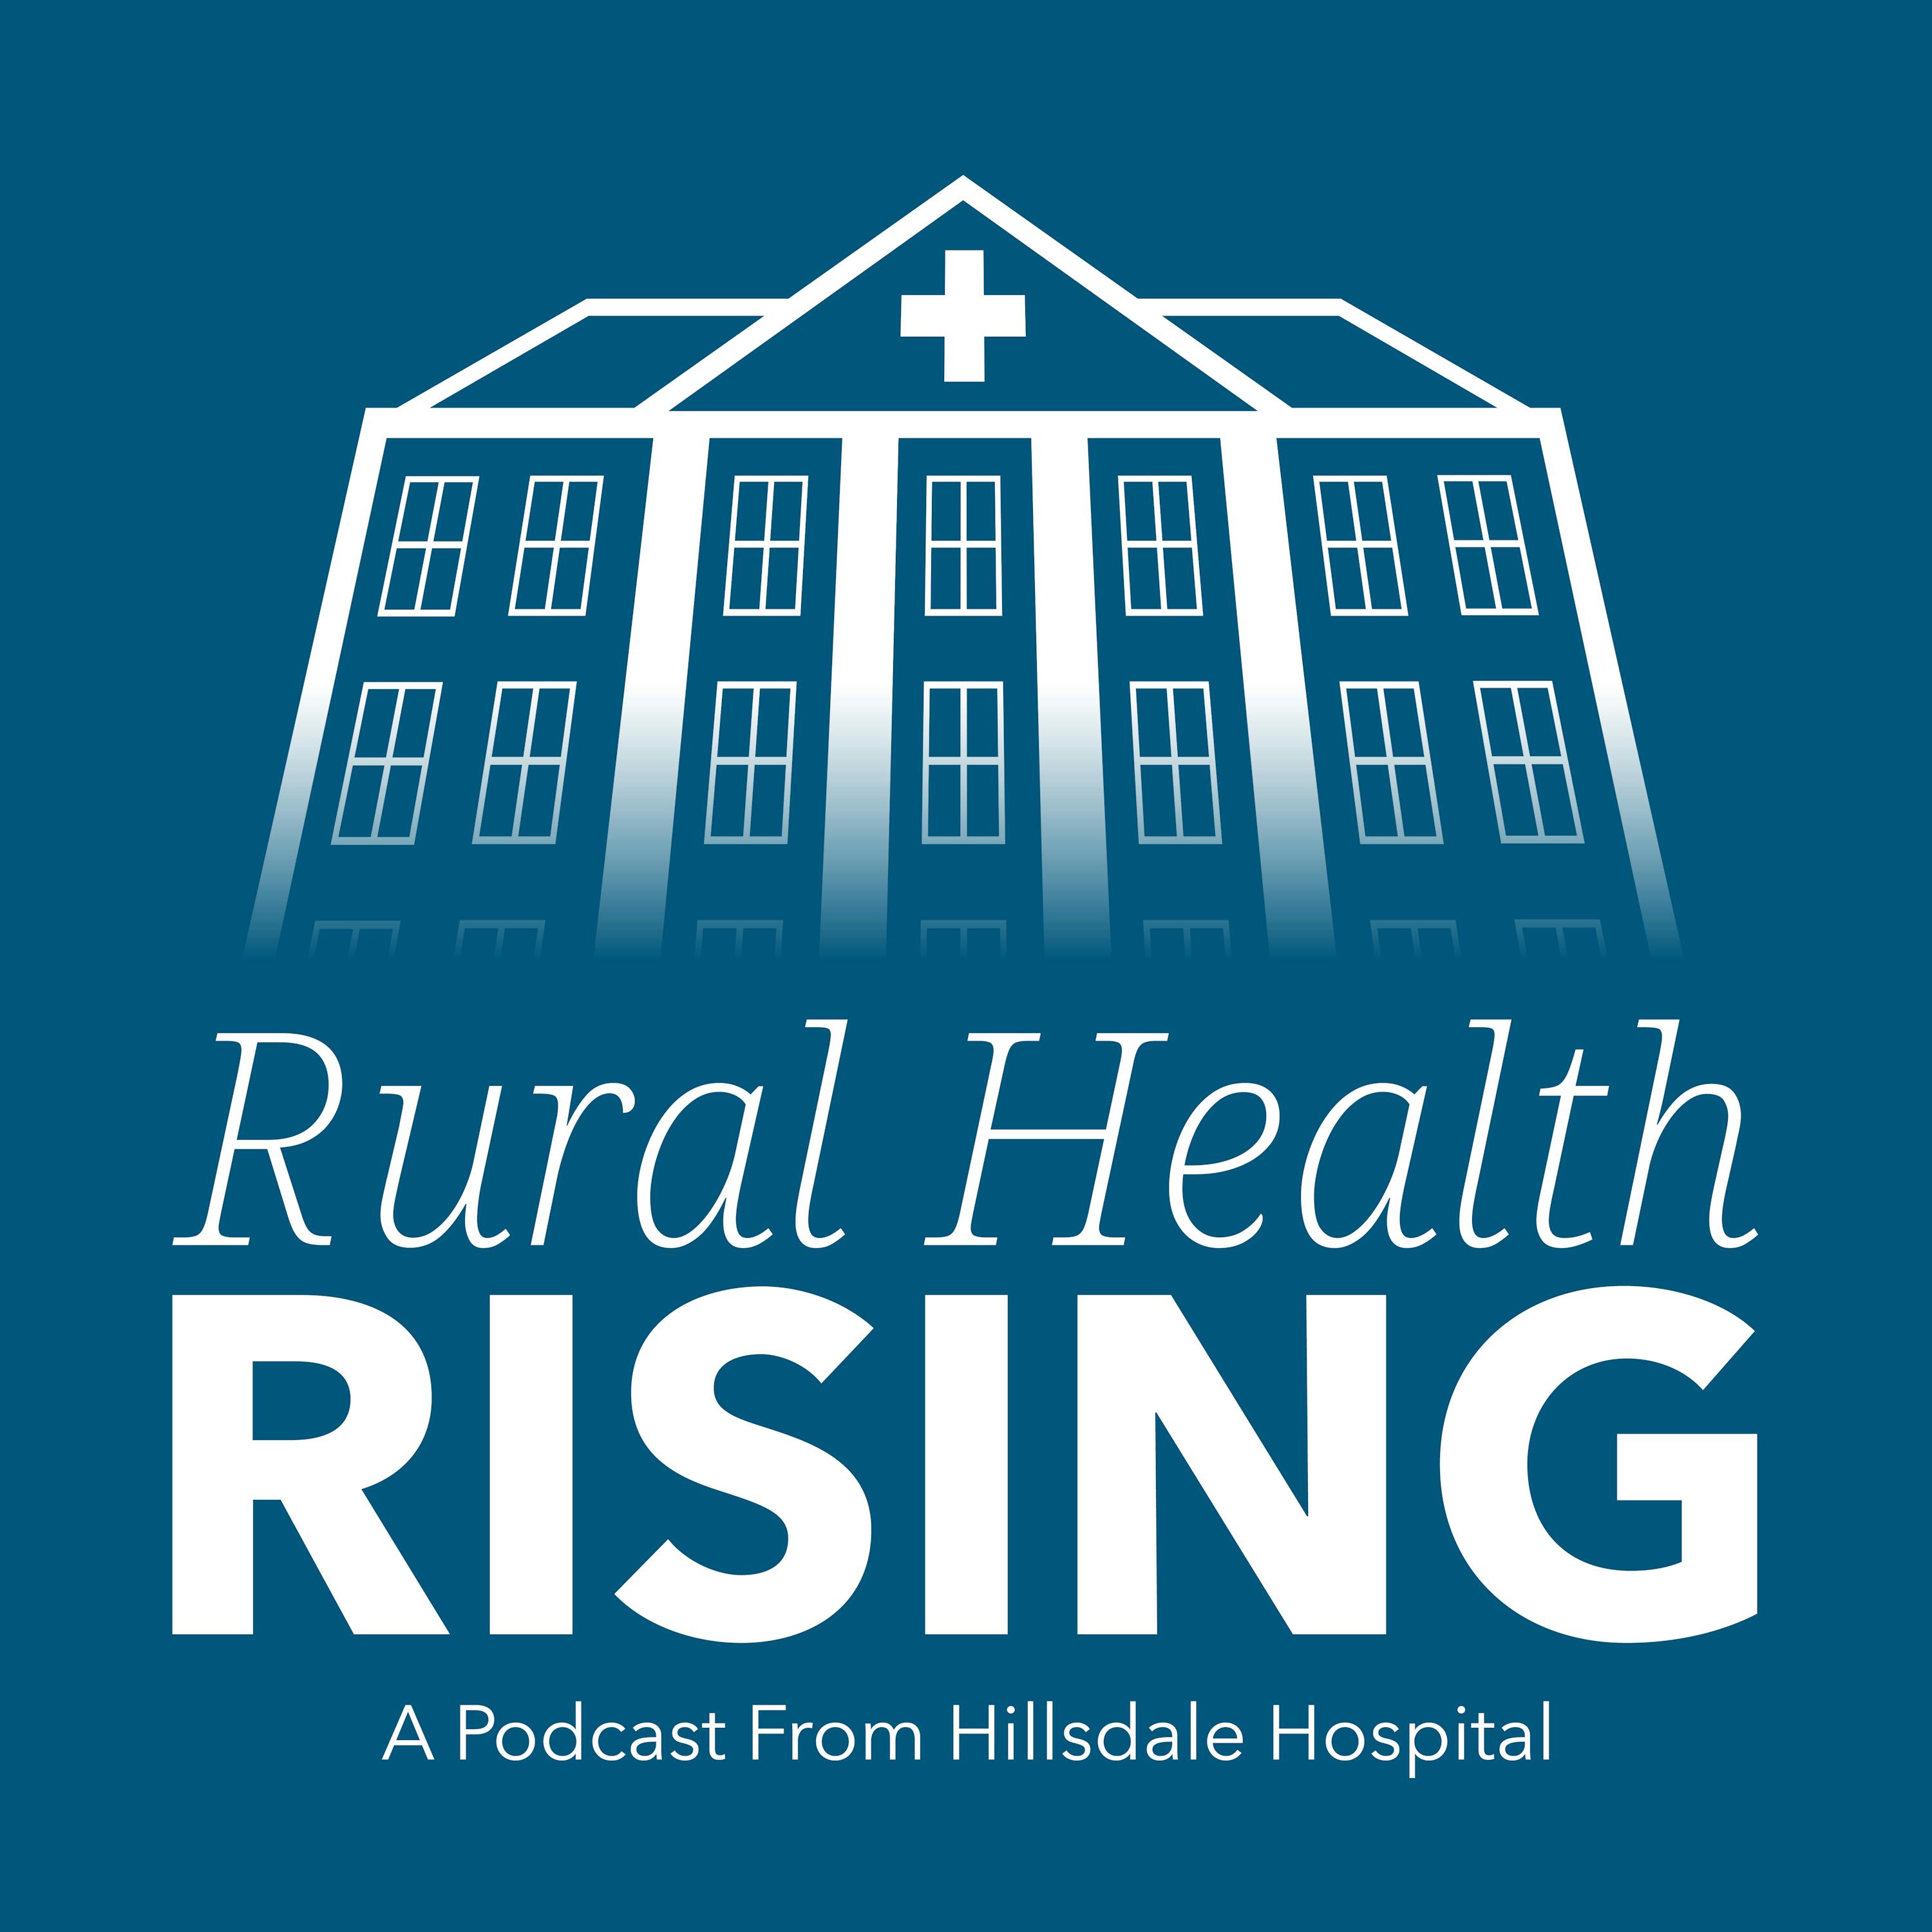 Episode 93: Caring for Kids in Rural America